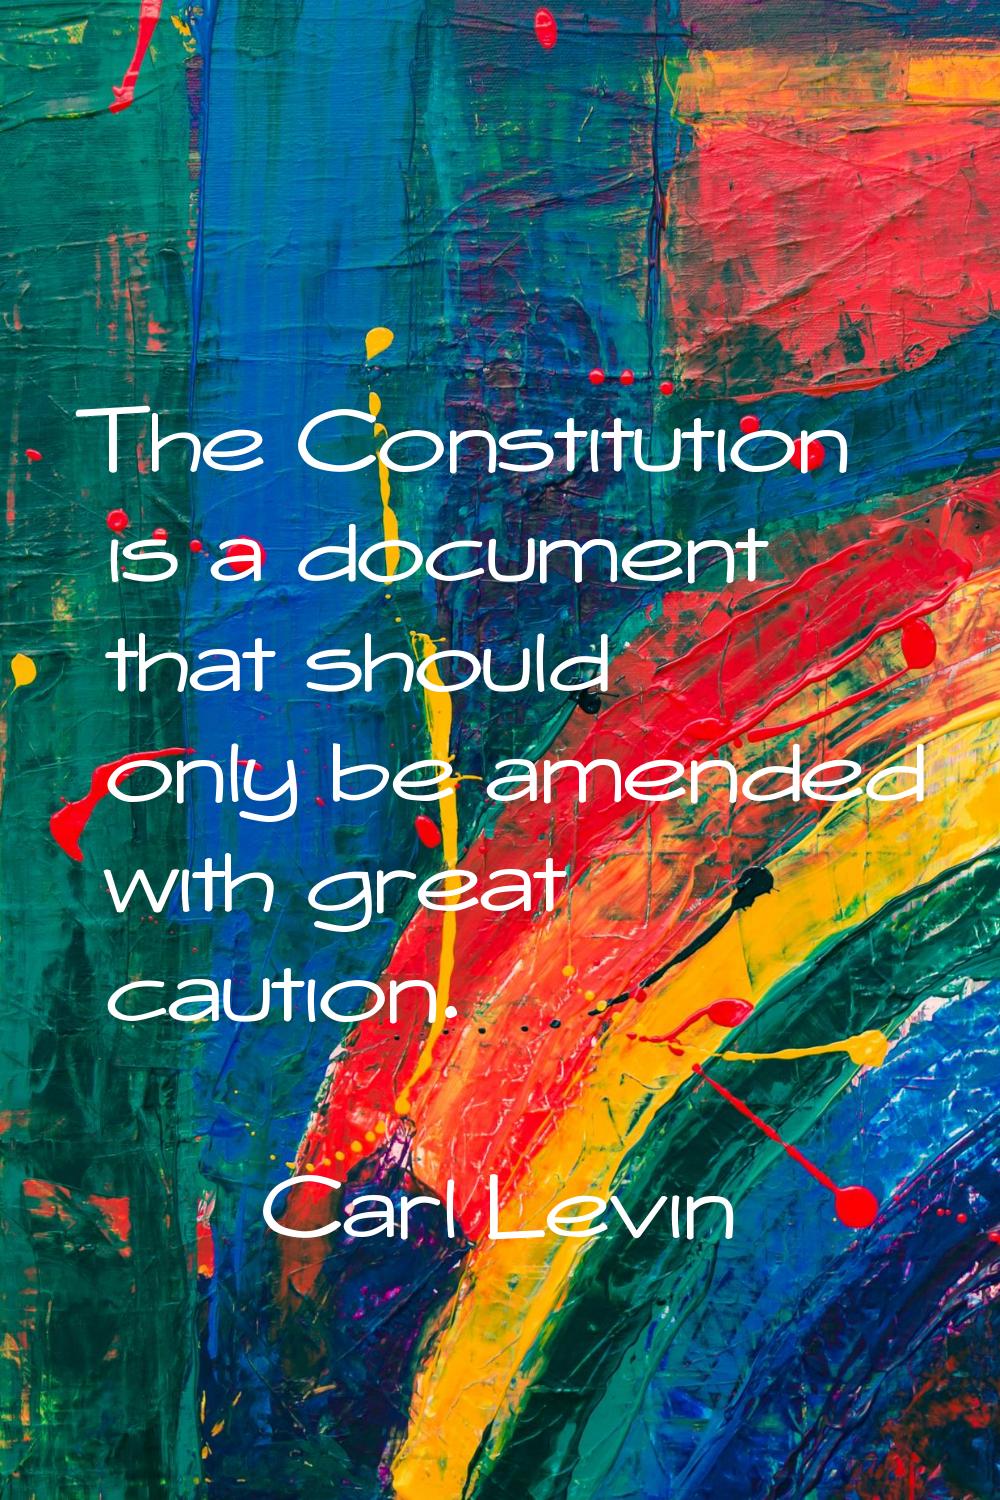 The Constitution is a document that should only be amended with great caution.